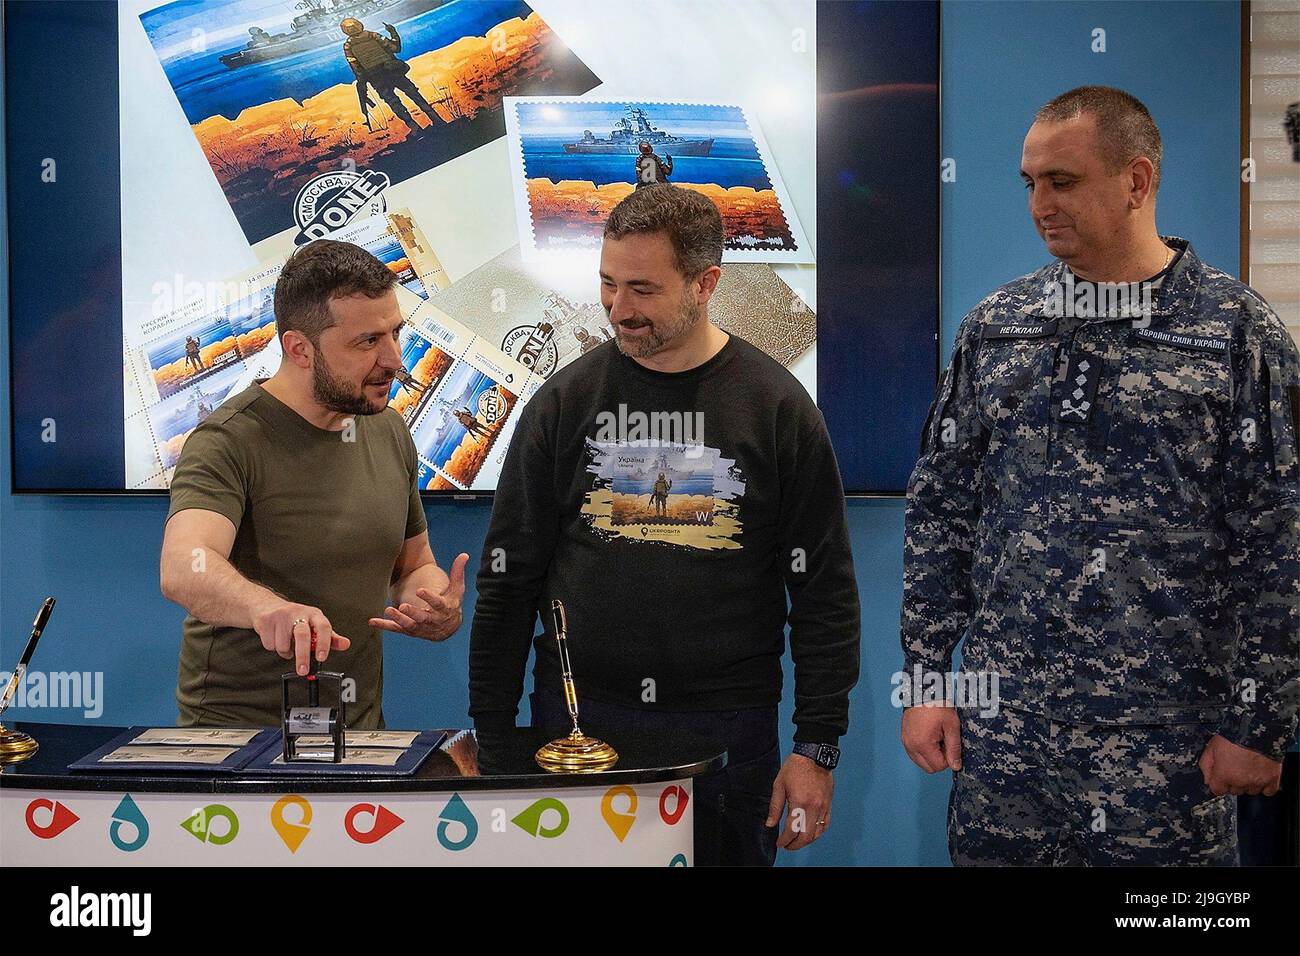 Kyiv, Ukraine. 23rd May, 2022. Ukrainian President Volodymyr Zelenskyy, left, uses the cancelation stamp on a collector set of the Russian Warship series postage stamp minted by the Ukrposhta, May 23, 2022 in Kyiv, Ukraine. Ukrposhta CEO Smilyanskyi Ihor, center, and Vice Admiral Oleksiy Neizhpapa, right, look on. Credit: Ukraine Presidency/Ukrainian Presidential Press Office/Alamy Live News Stock Photo